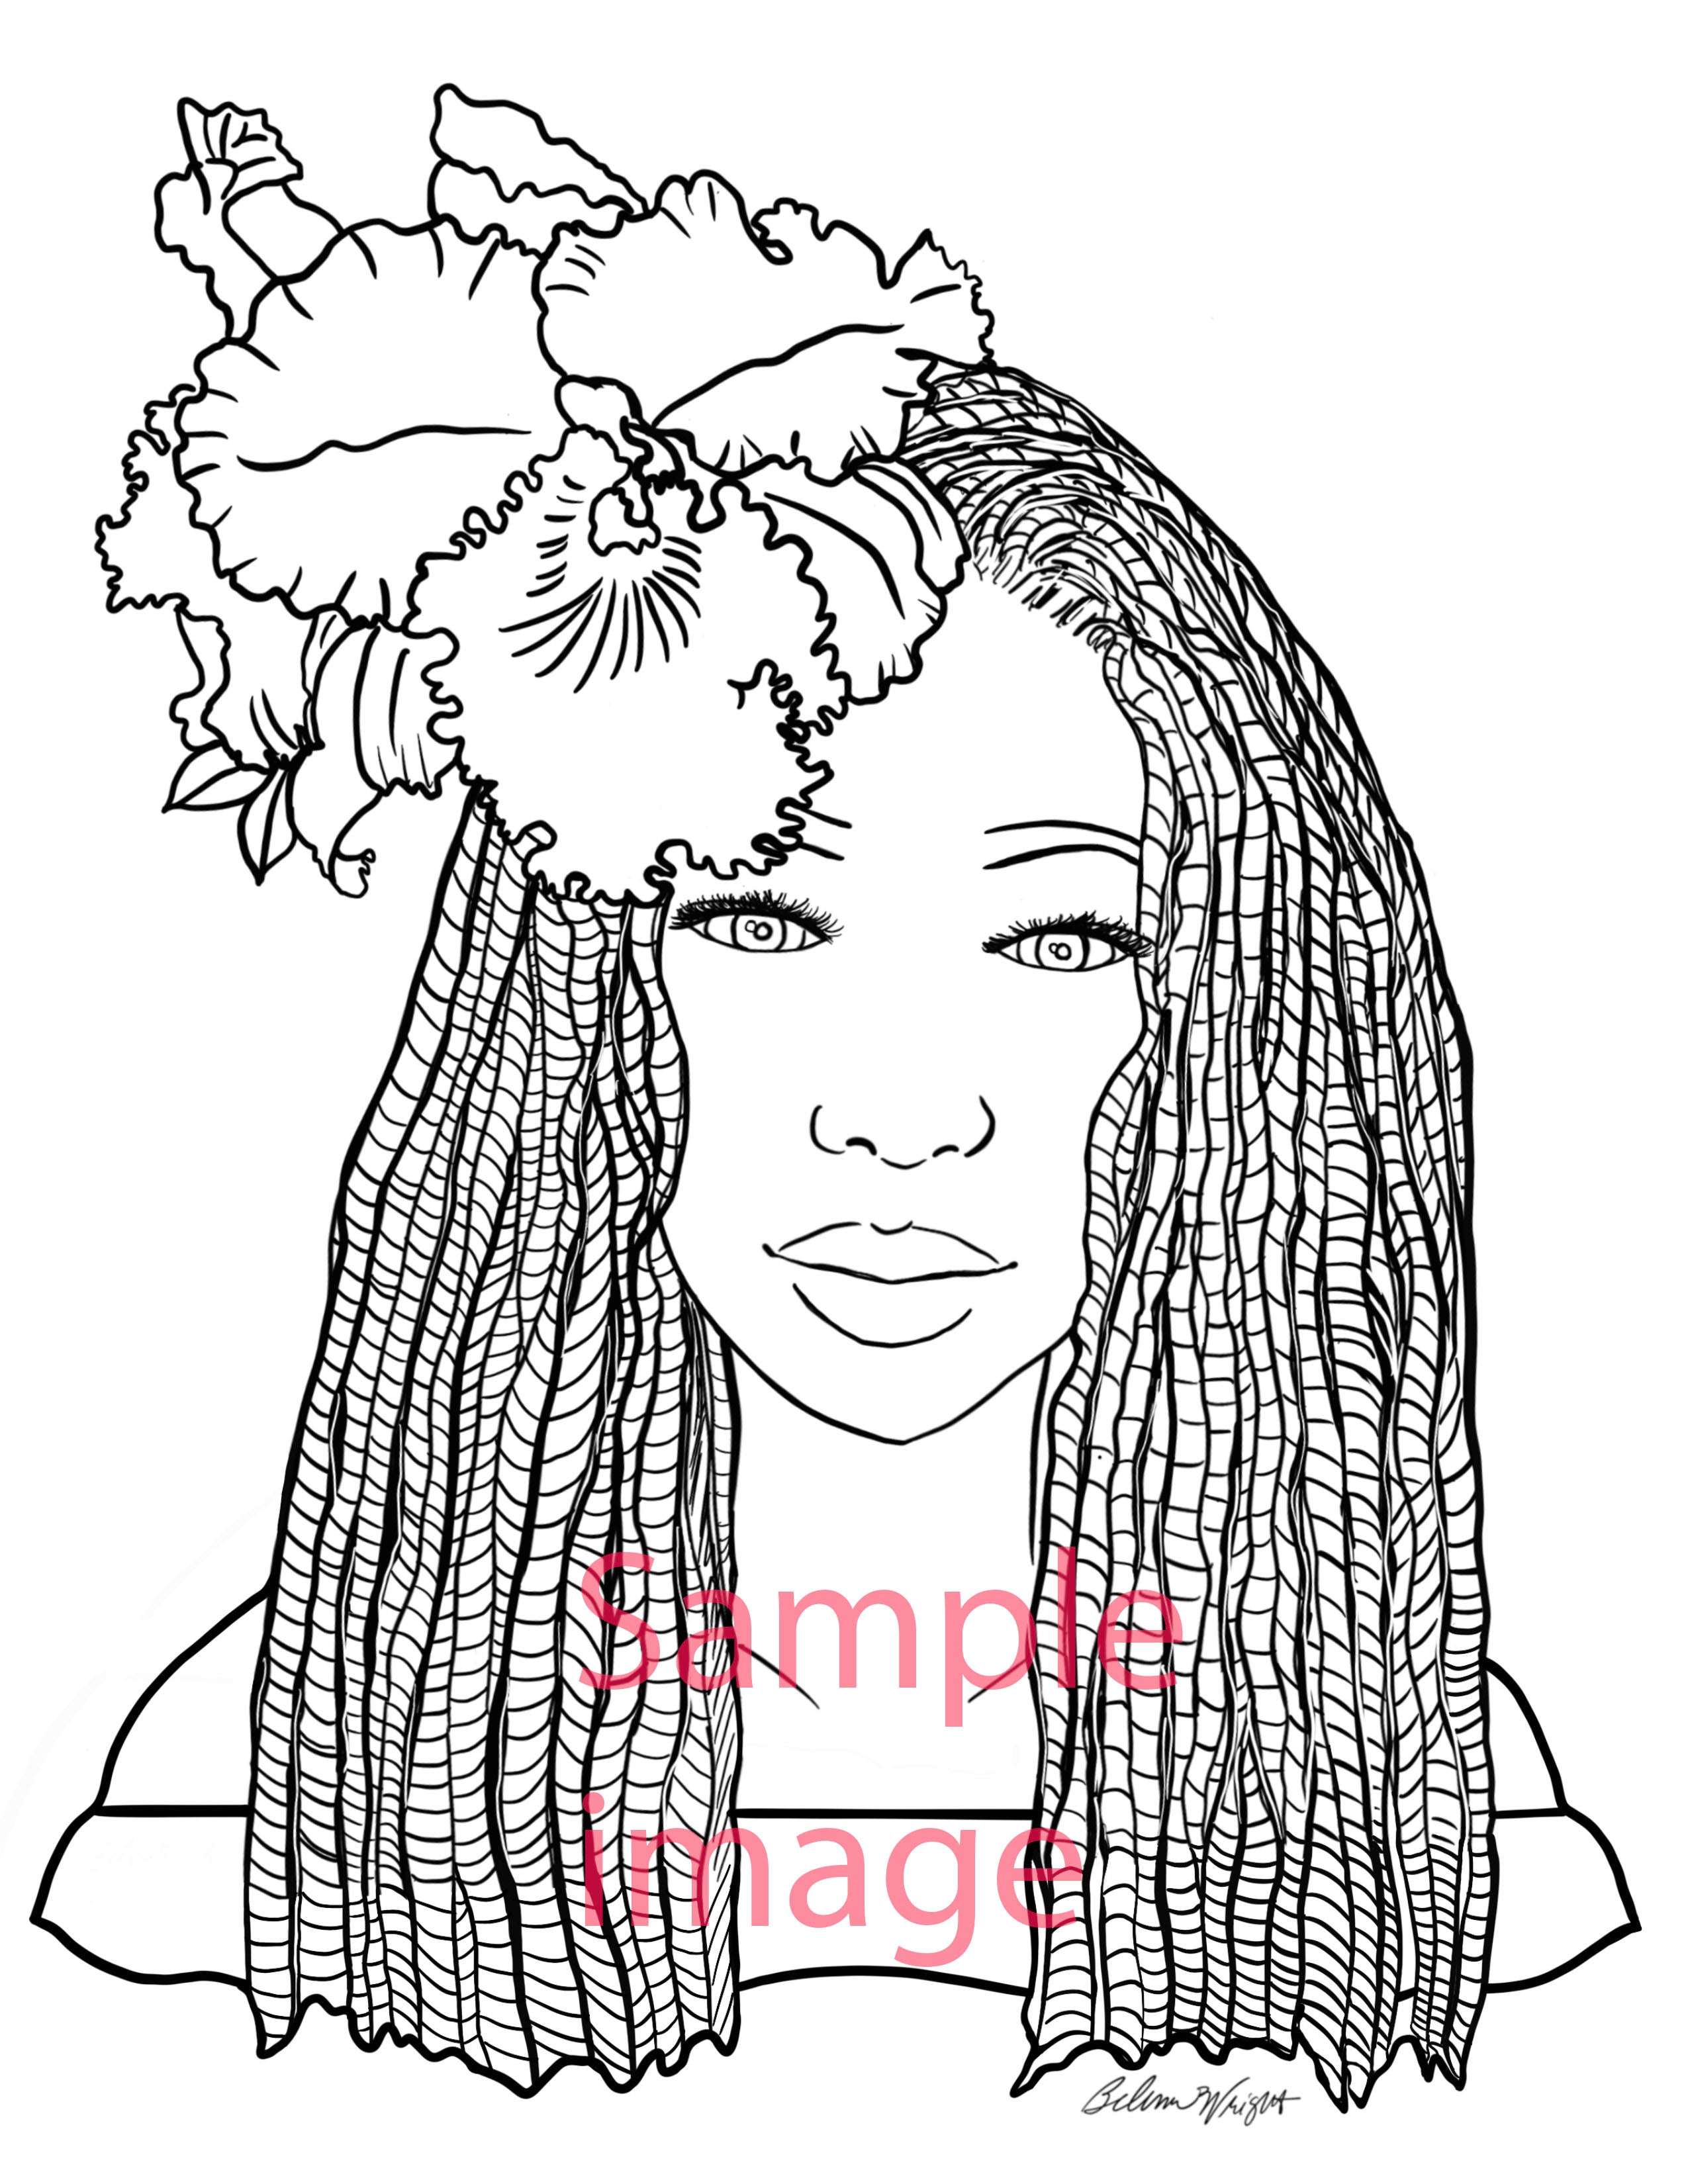 She Blooms Coloring Book for Teens and Adults by: Belina Wright 8.5x11 –  BwrightArt